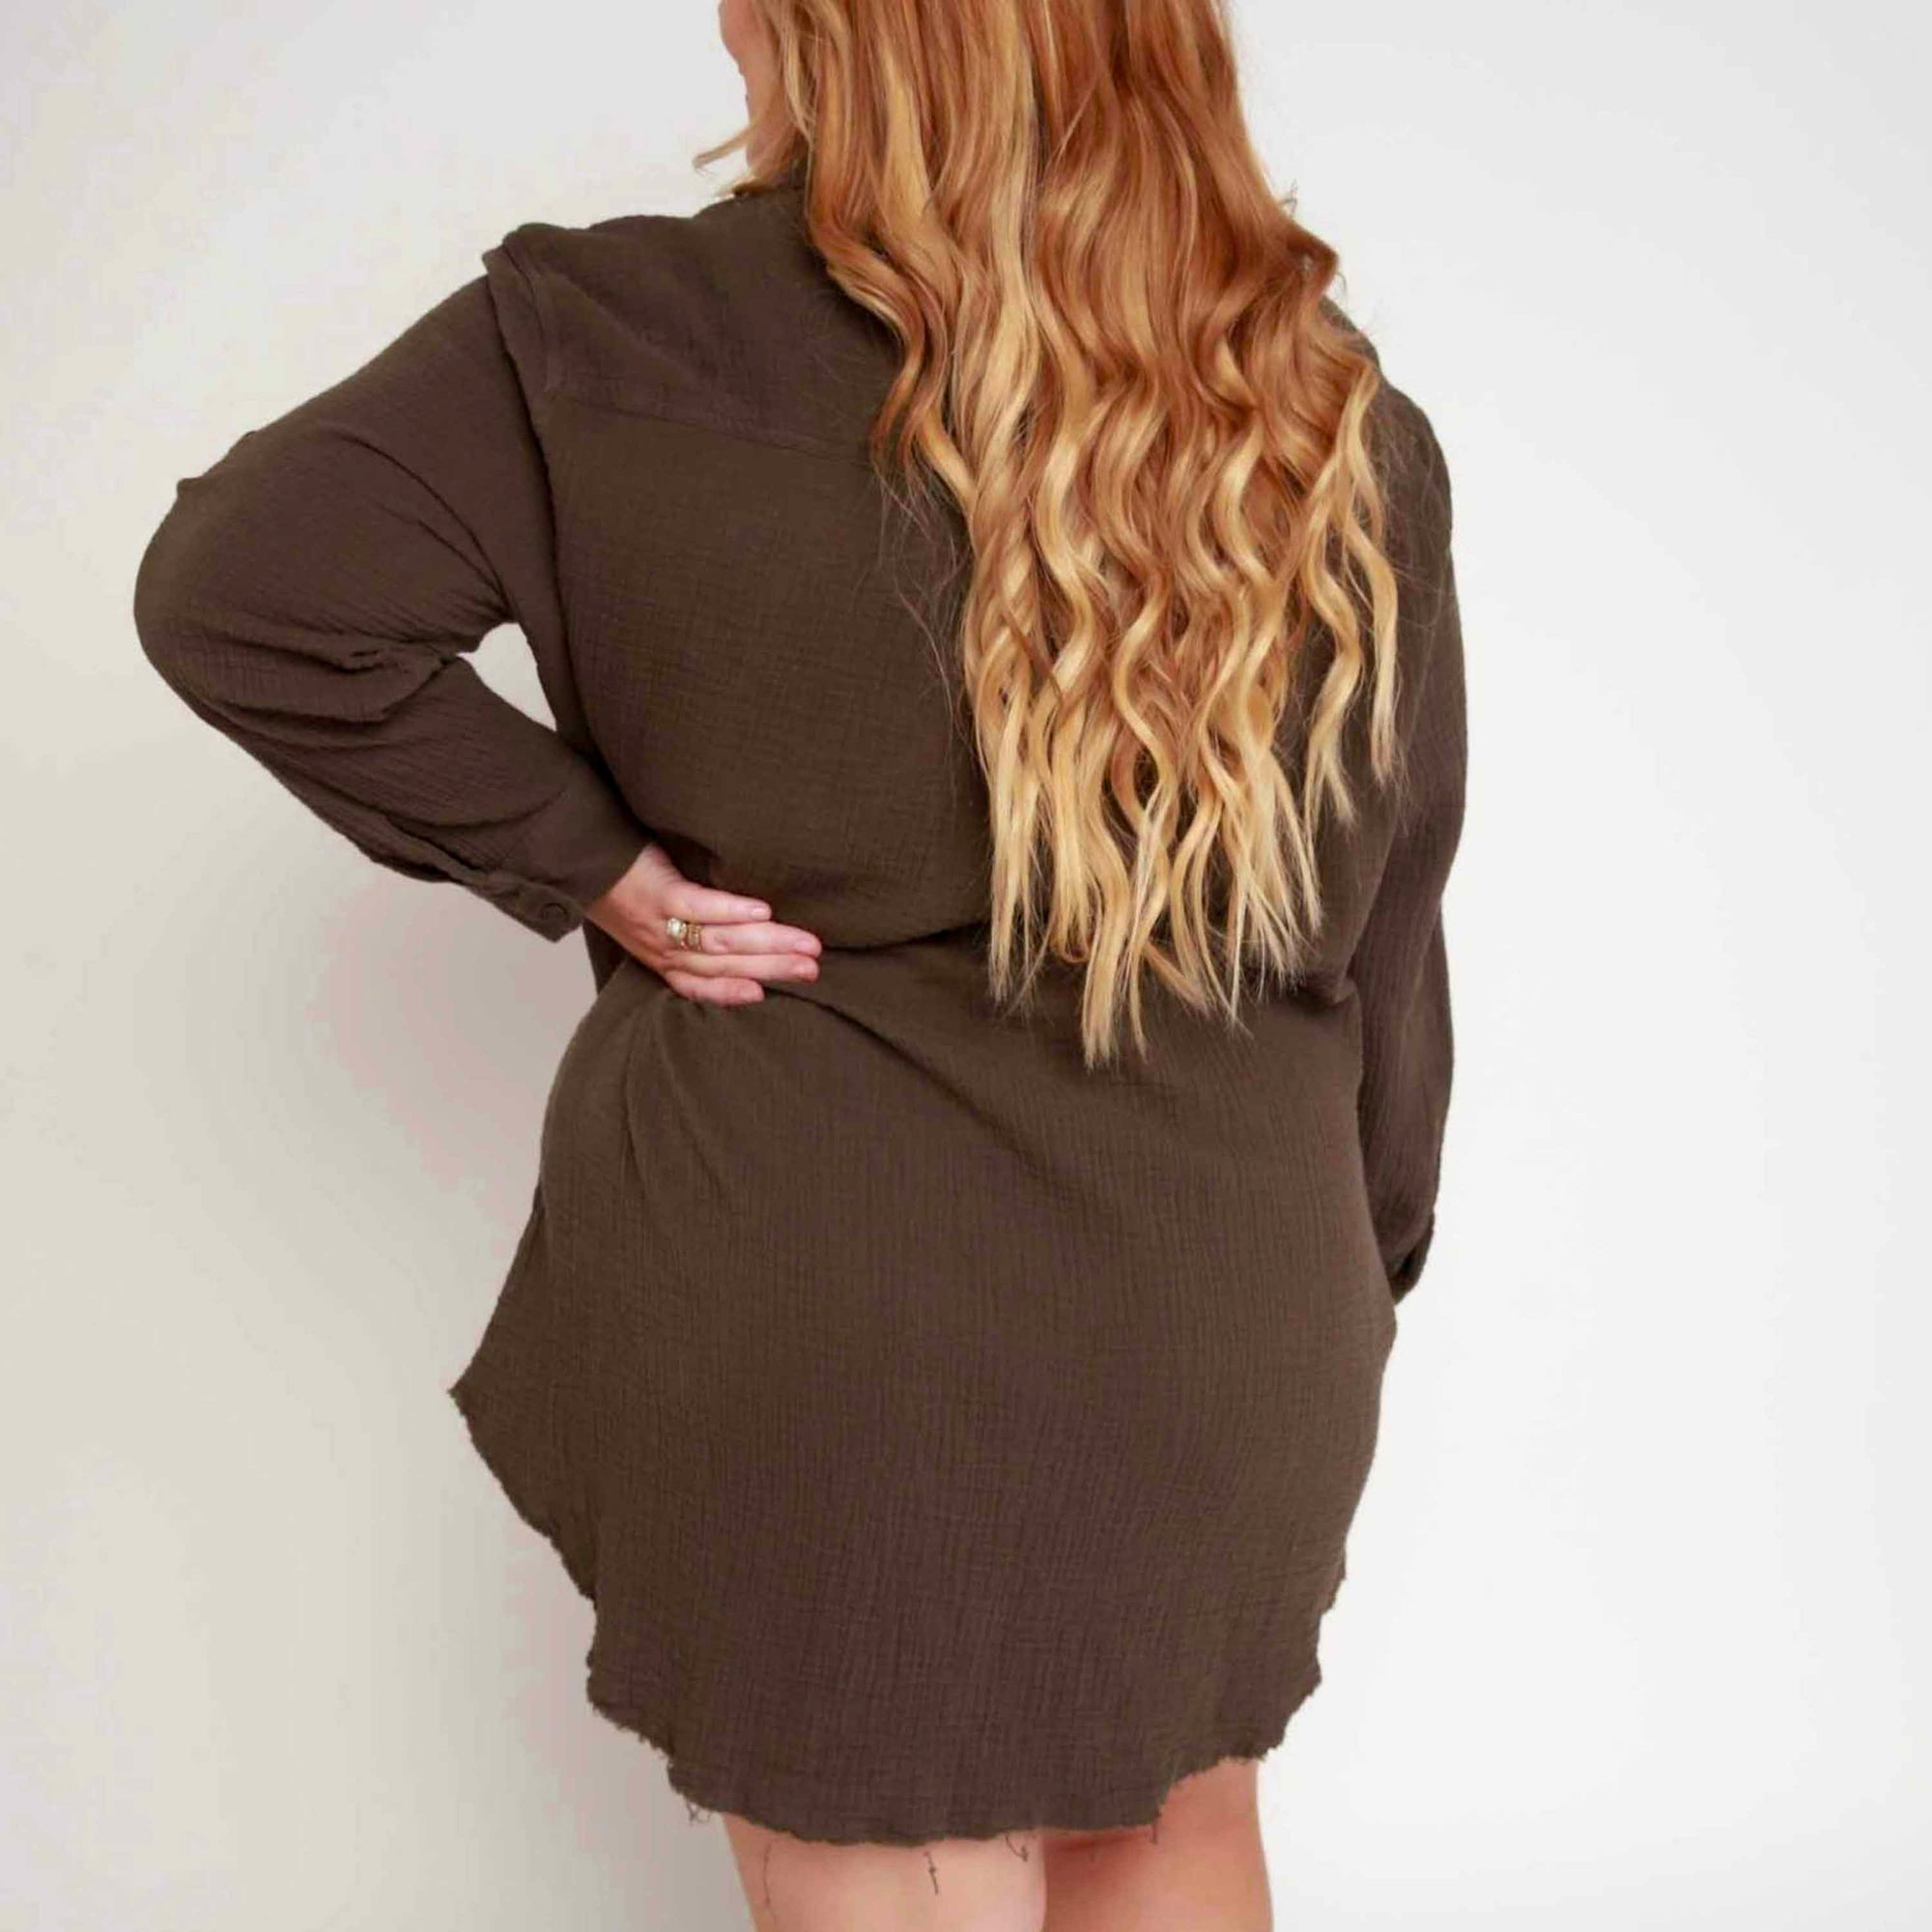 Olive Button Up Dress